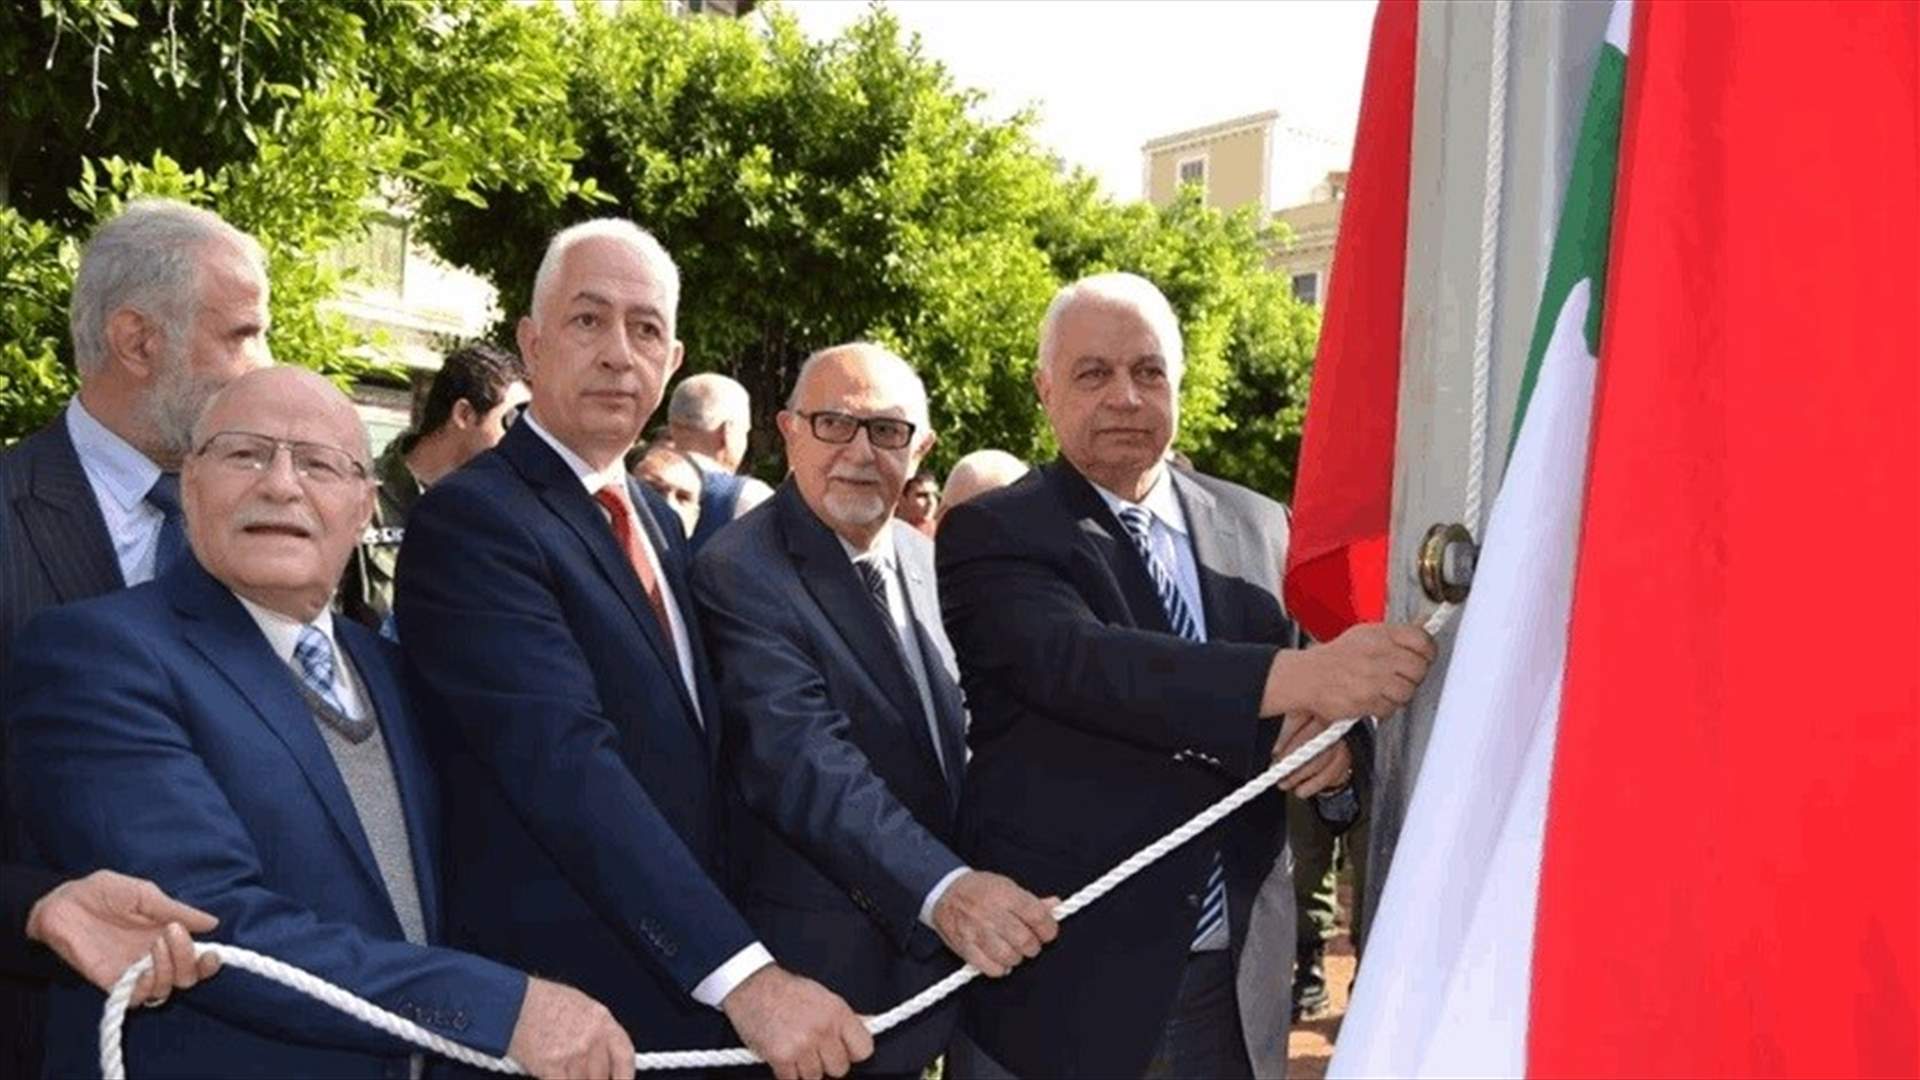 Largest Lebanese flag raised in Tripoli on the occasion of Independence